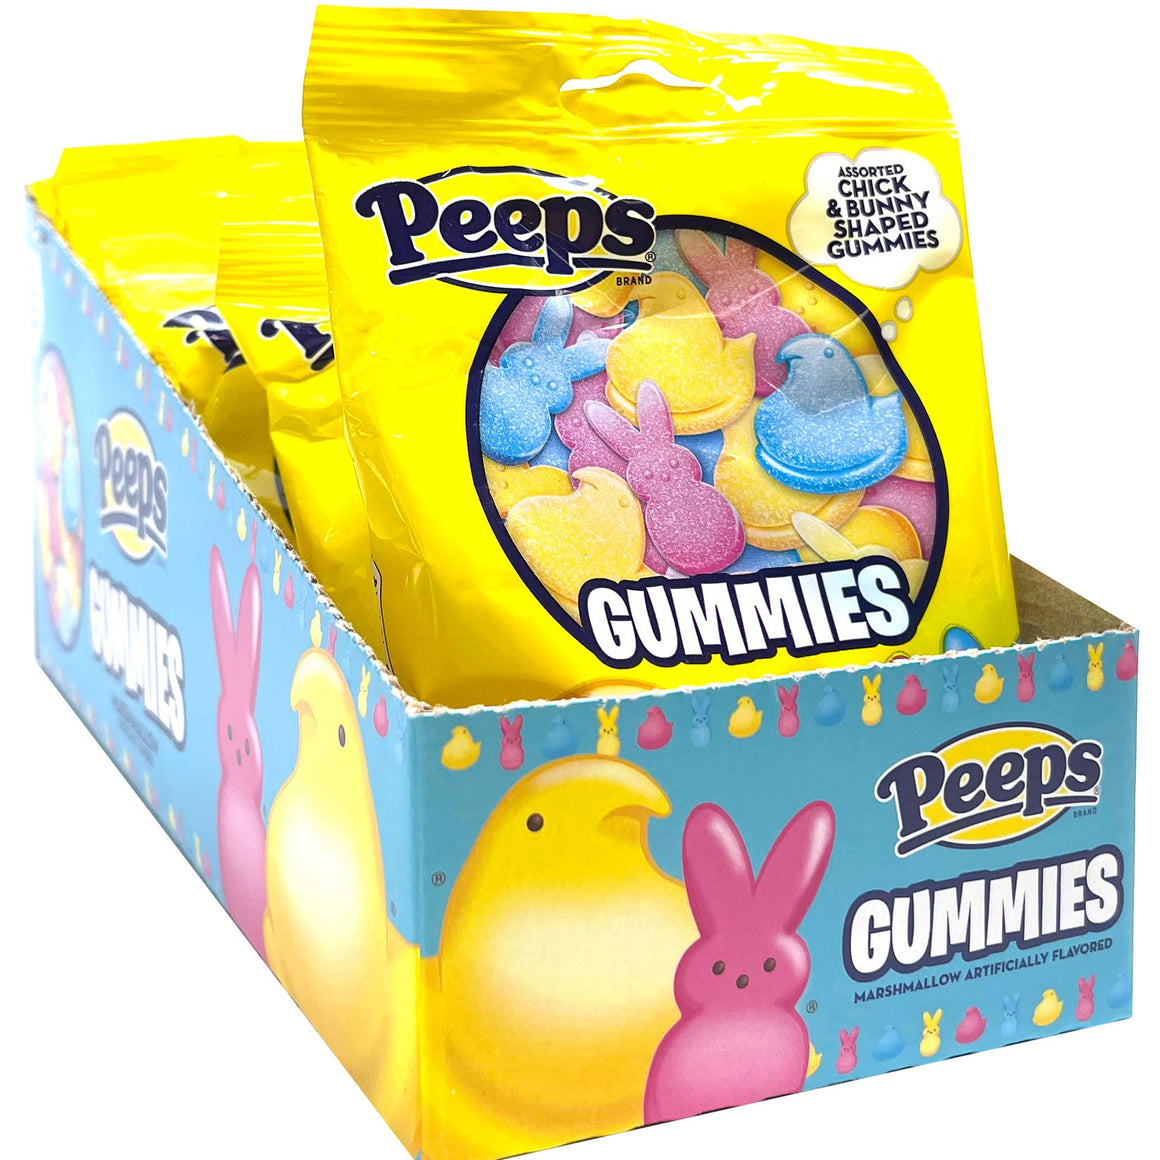 All City Candy Peeps Gummies 3.75 oz. Bag Easter Flix Candy For fresh candy and great service, visit www.allcitycandy.com